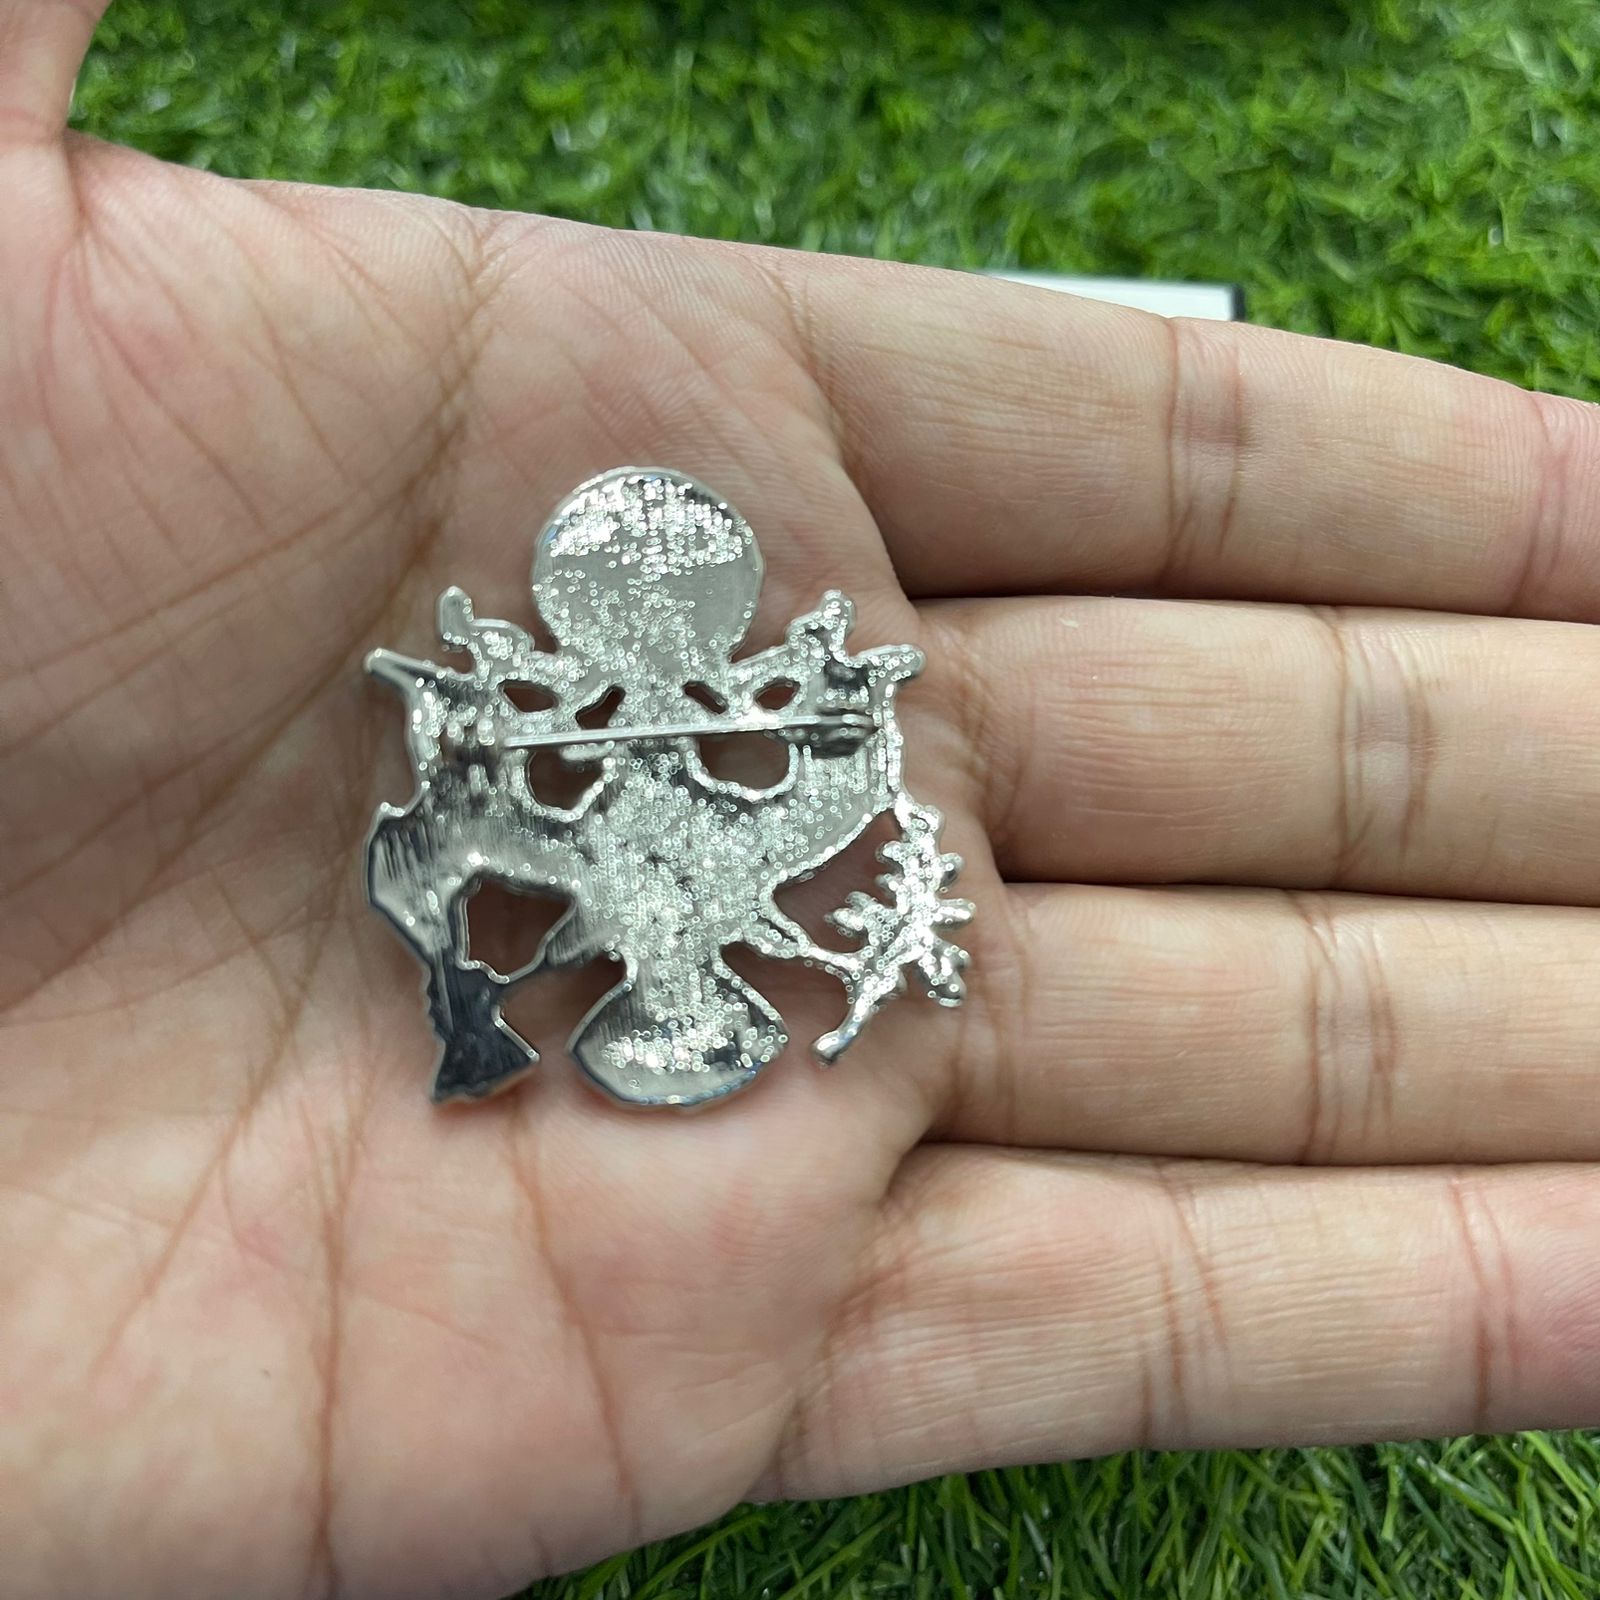 Silver Military Falcon Brooch lapel Pin For Men Suit In Pakistan